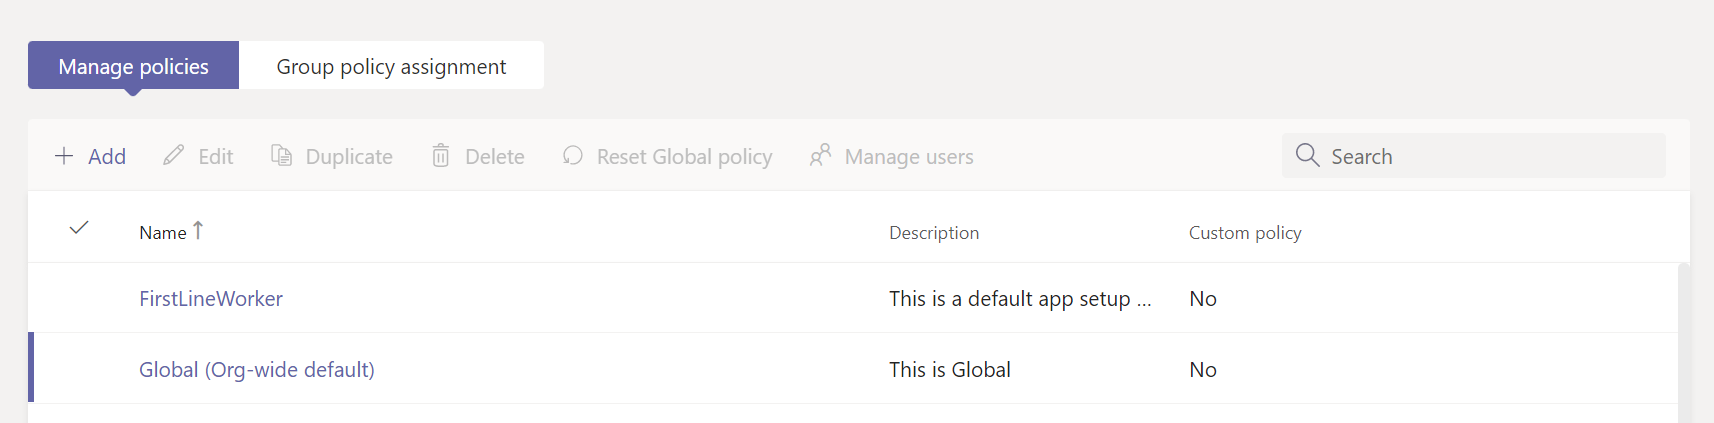 Screenshot shows the app setup policies page with options to manage policies or add new policies.